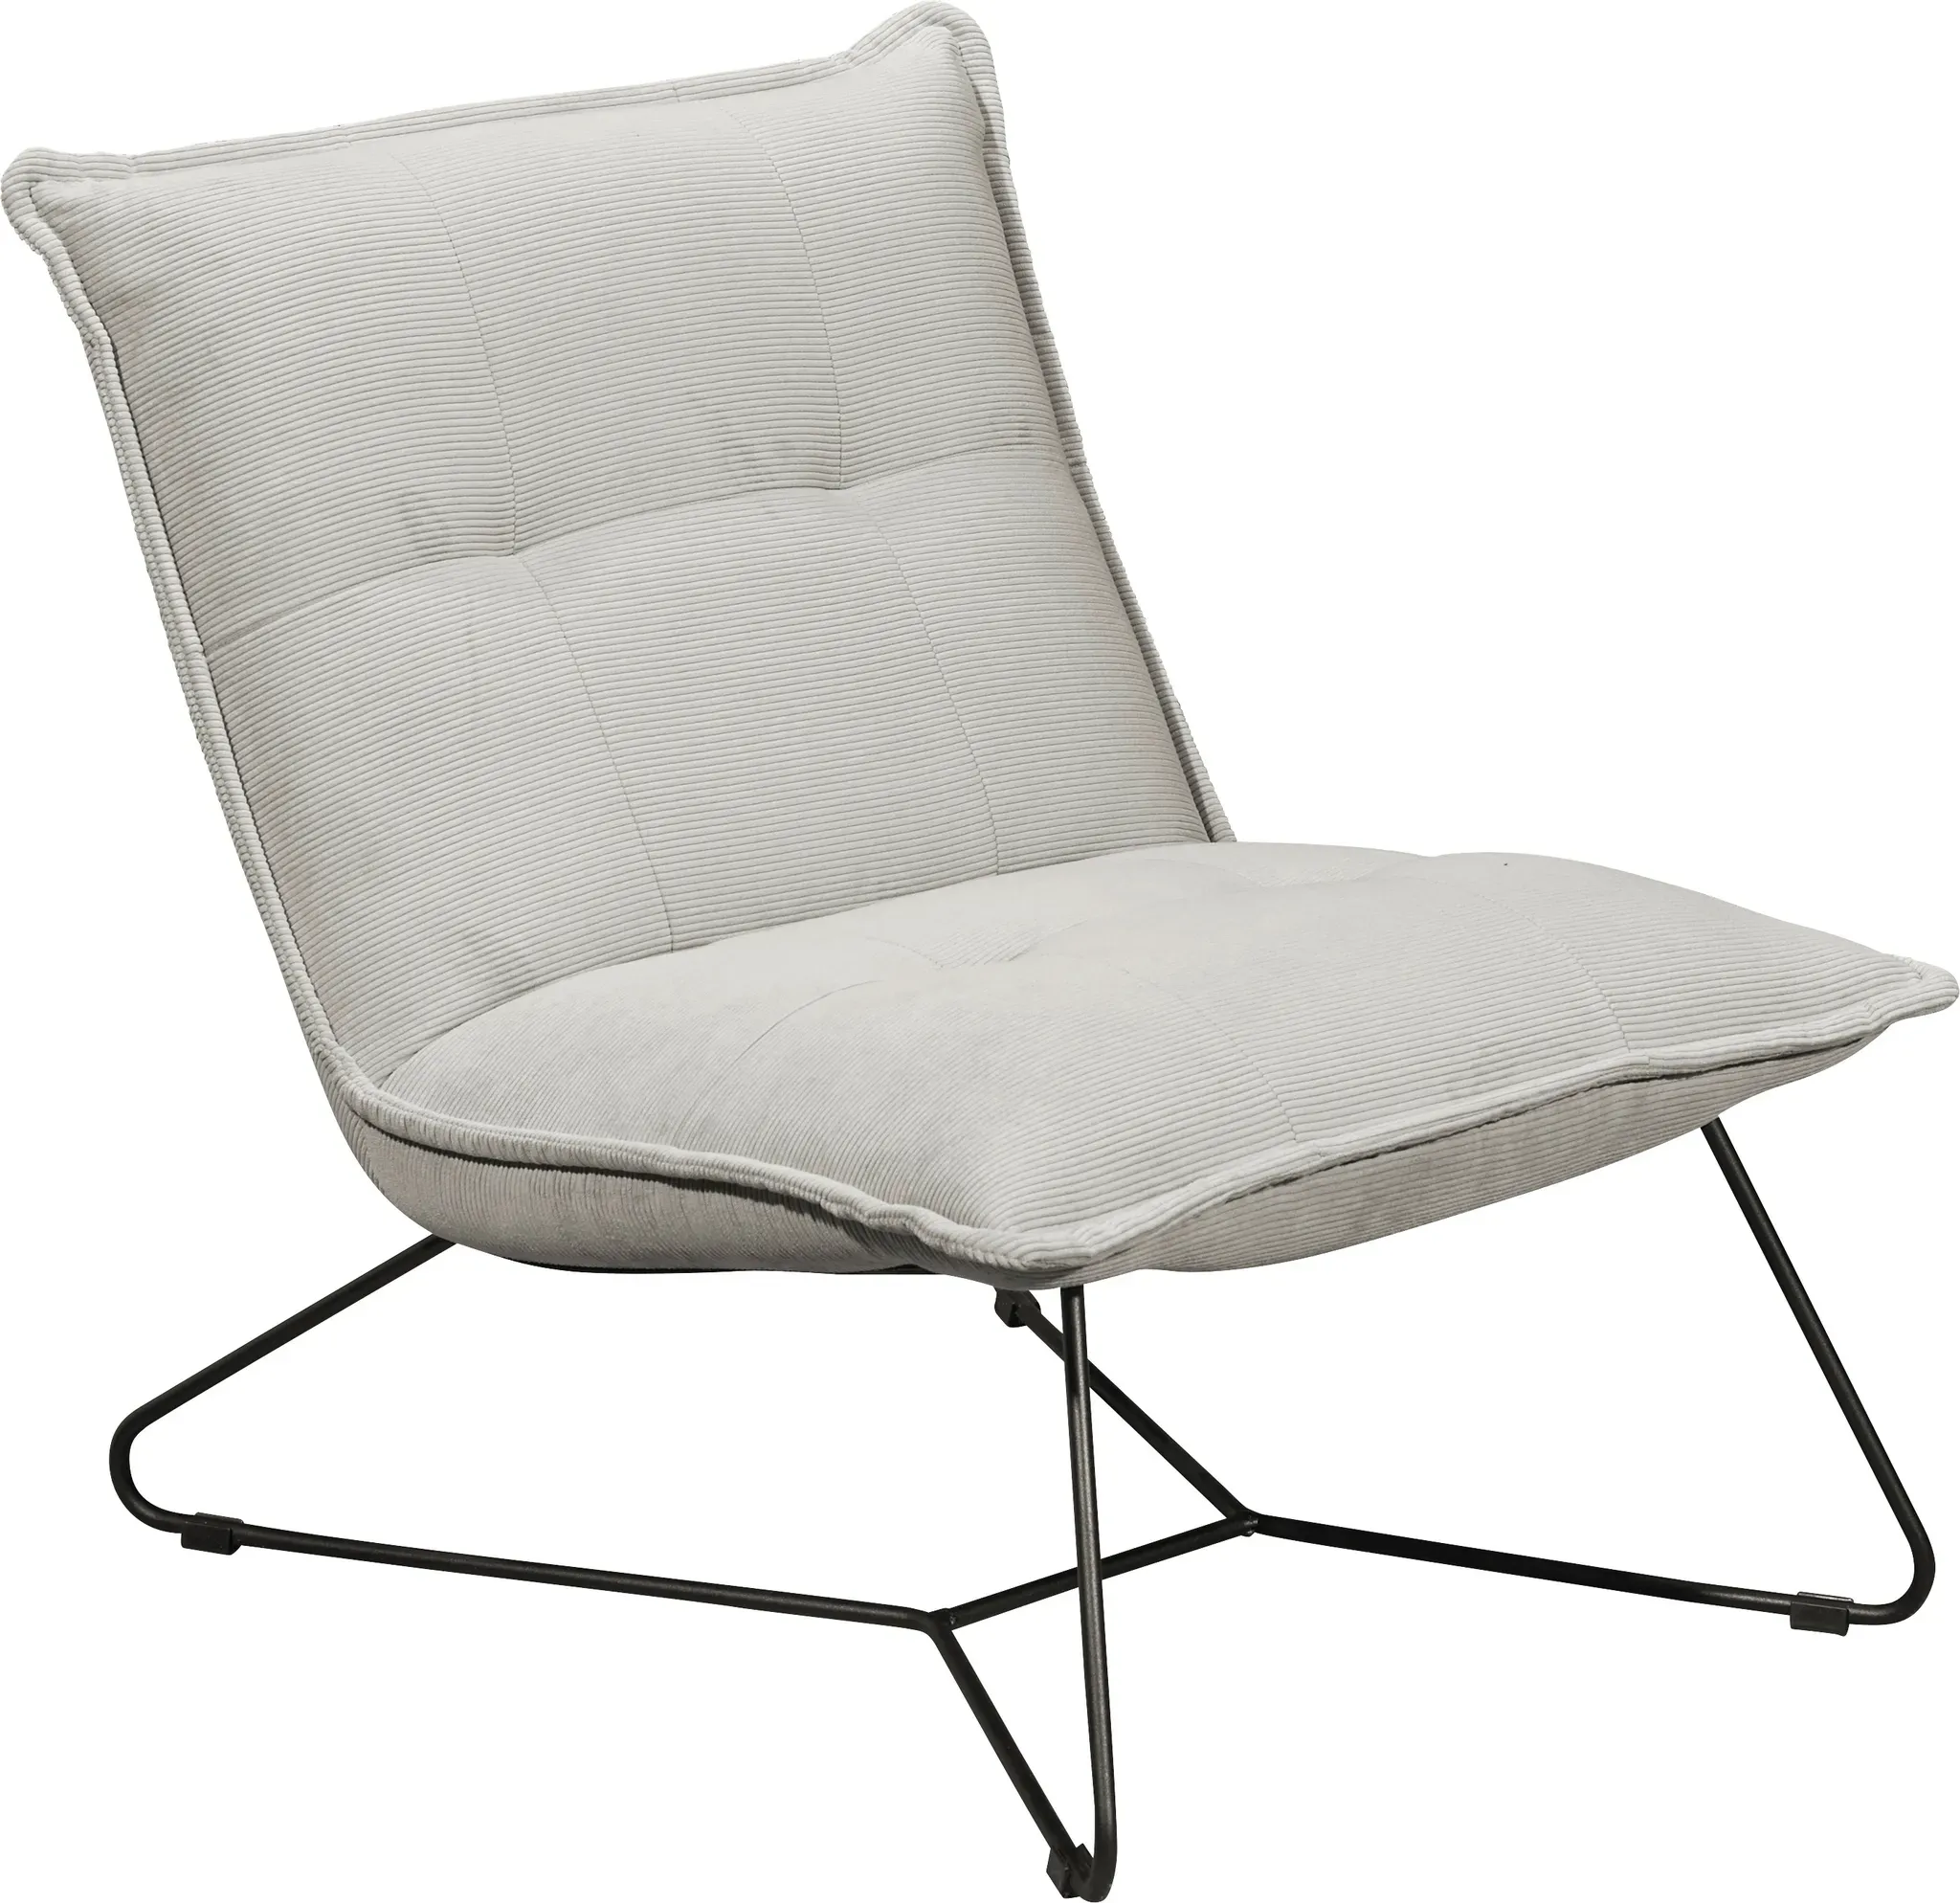 Sessel ED EXCITING DESIGN "Vico" Gr. Cord, B/H/T: 69 cm x 76 cm x 86 cm, beige Einzelsessel Lounge-Sessel Loungesessel mit Design-Gestell aus schwarzem Metall, in Cord